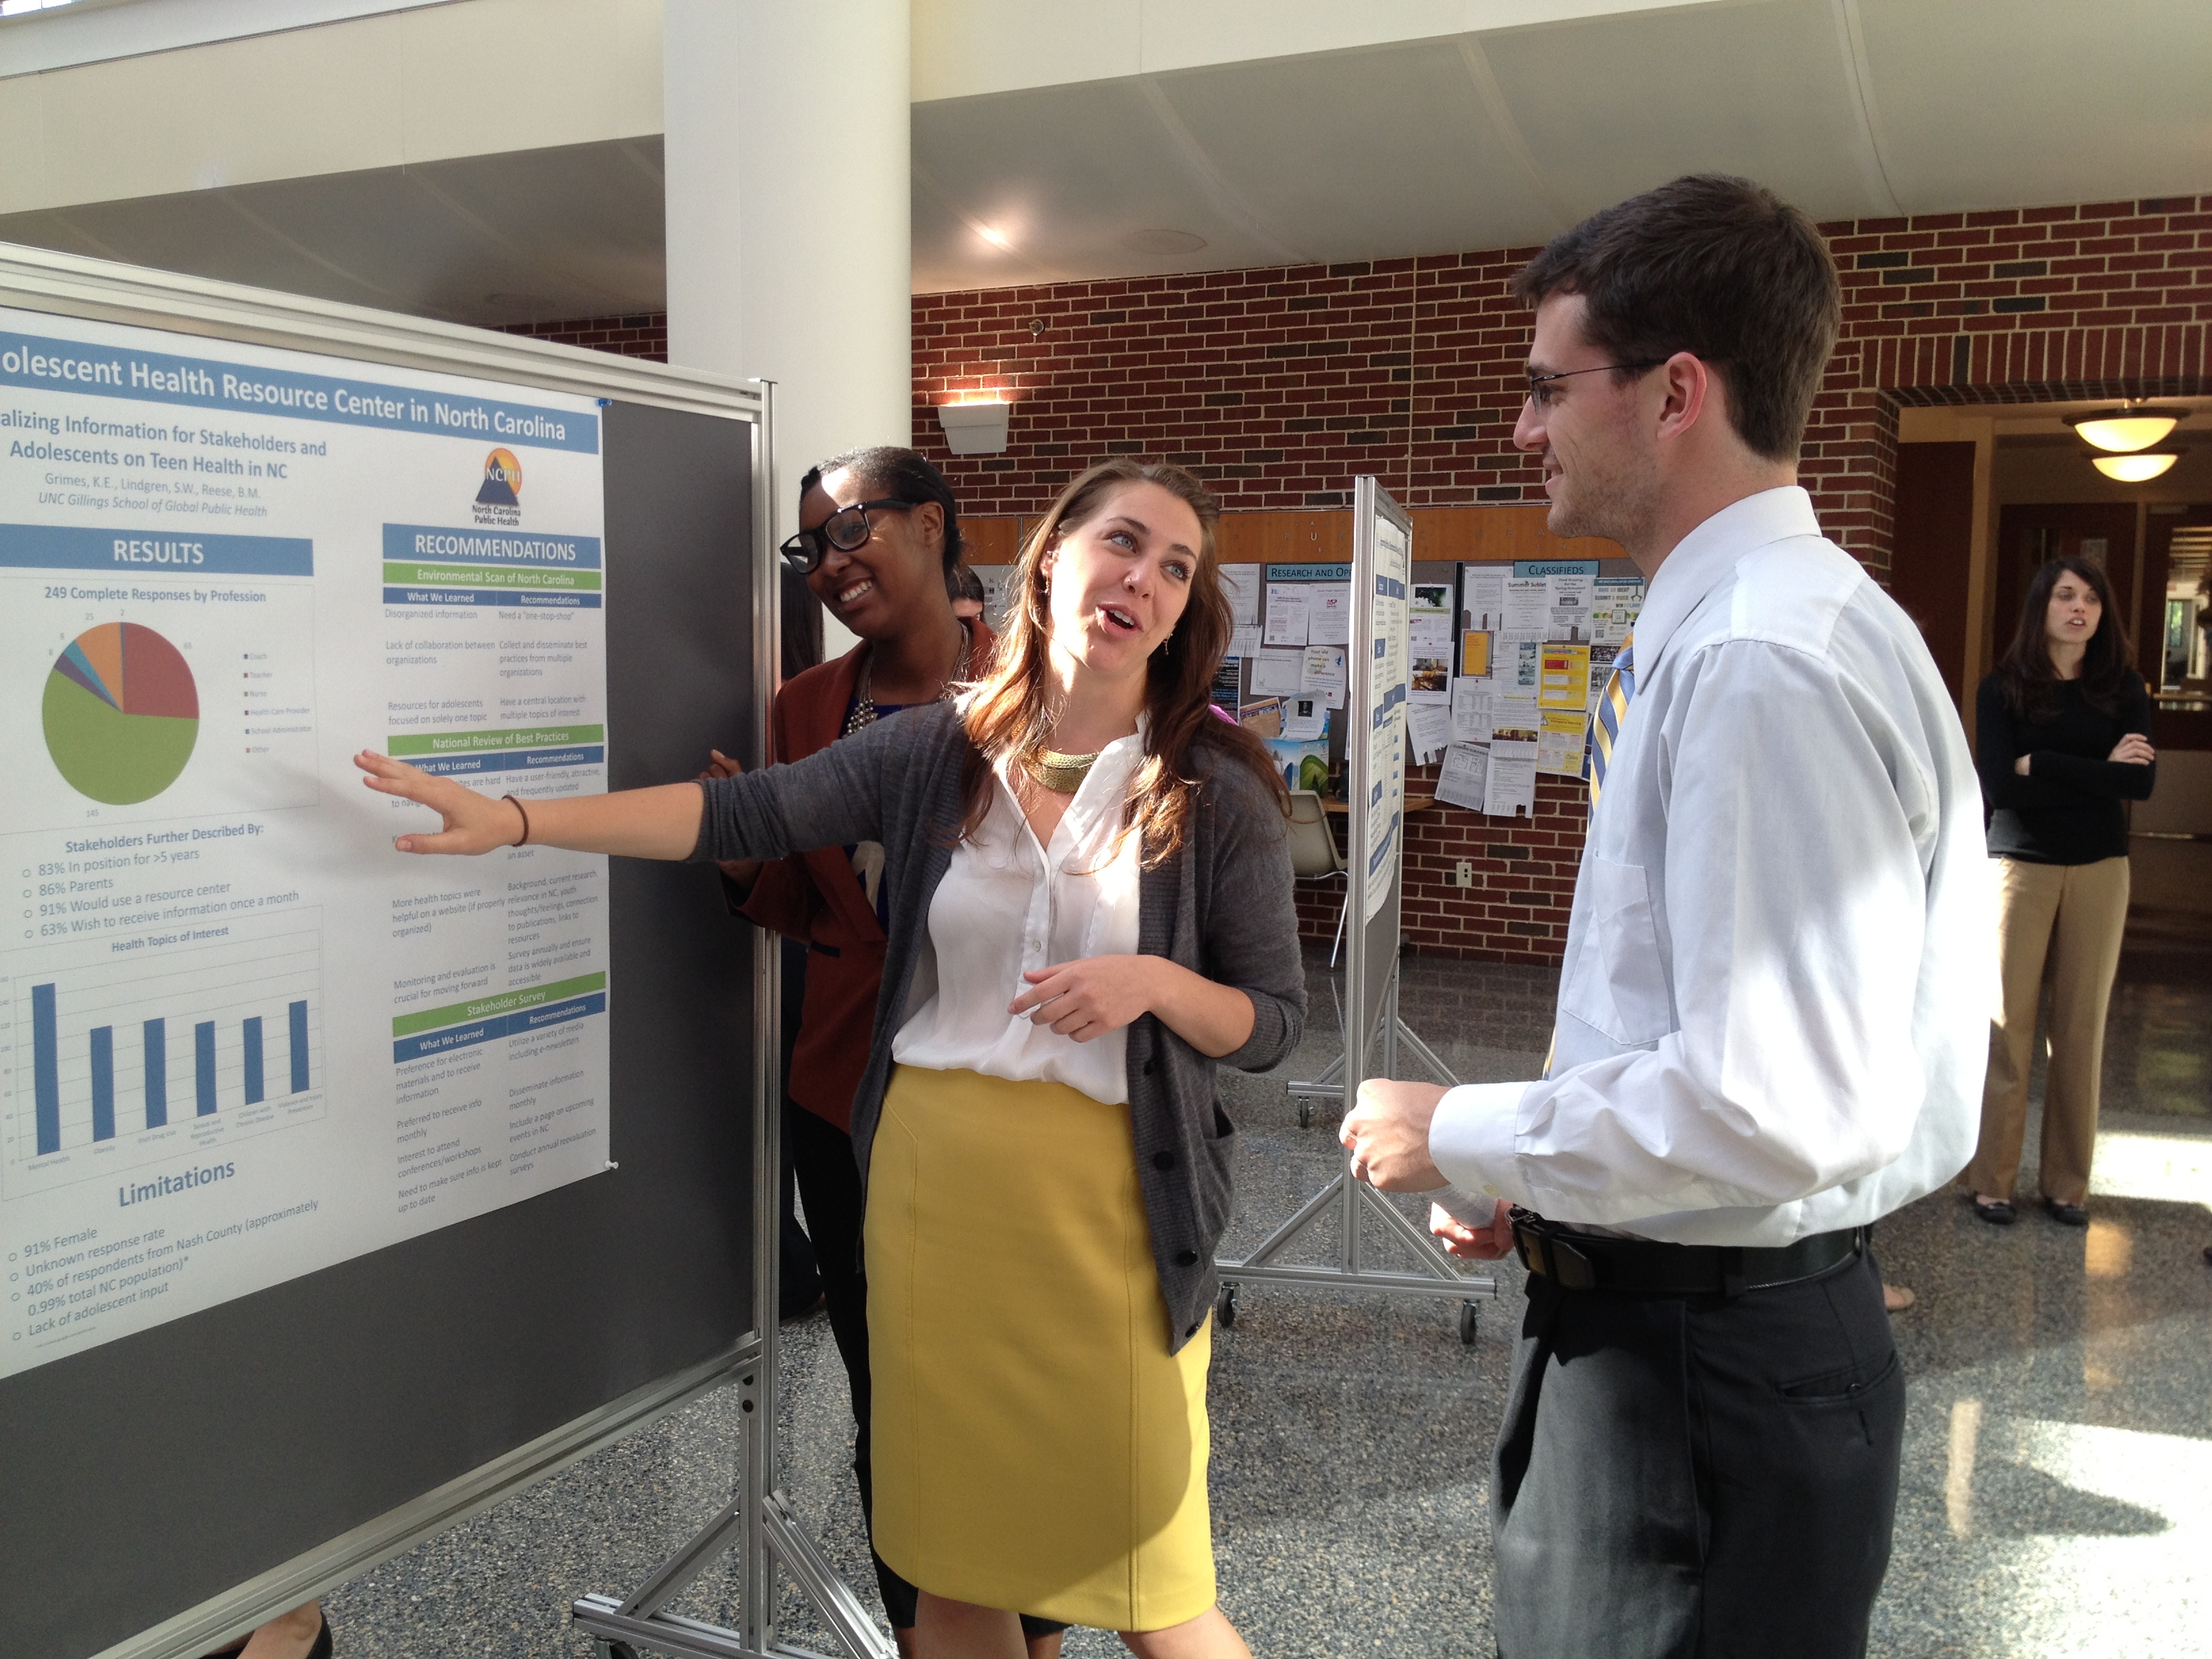 A UNC Gillings student shares her findings on communicating key health information to teens in North Carolina.